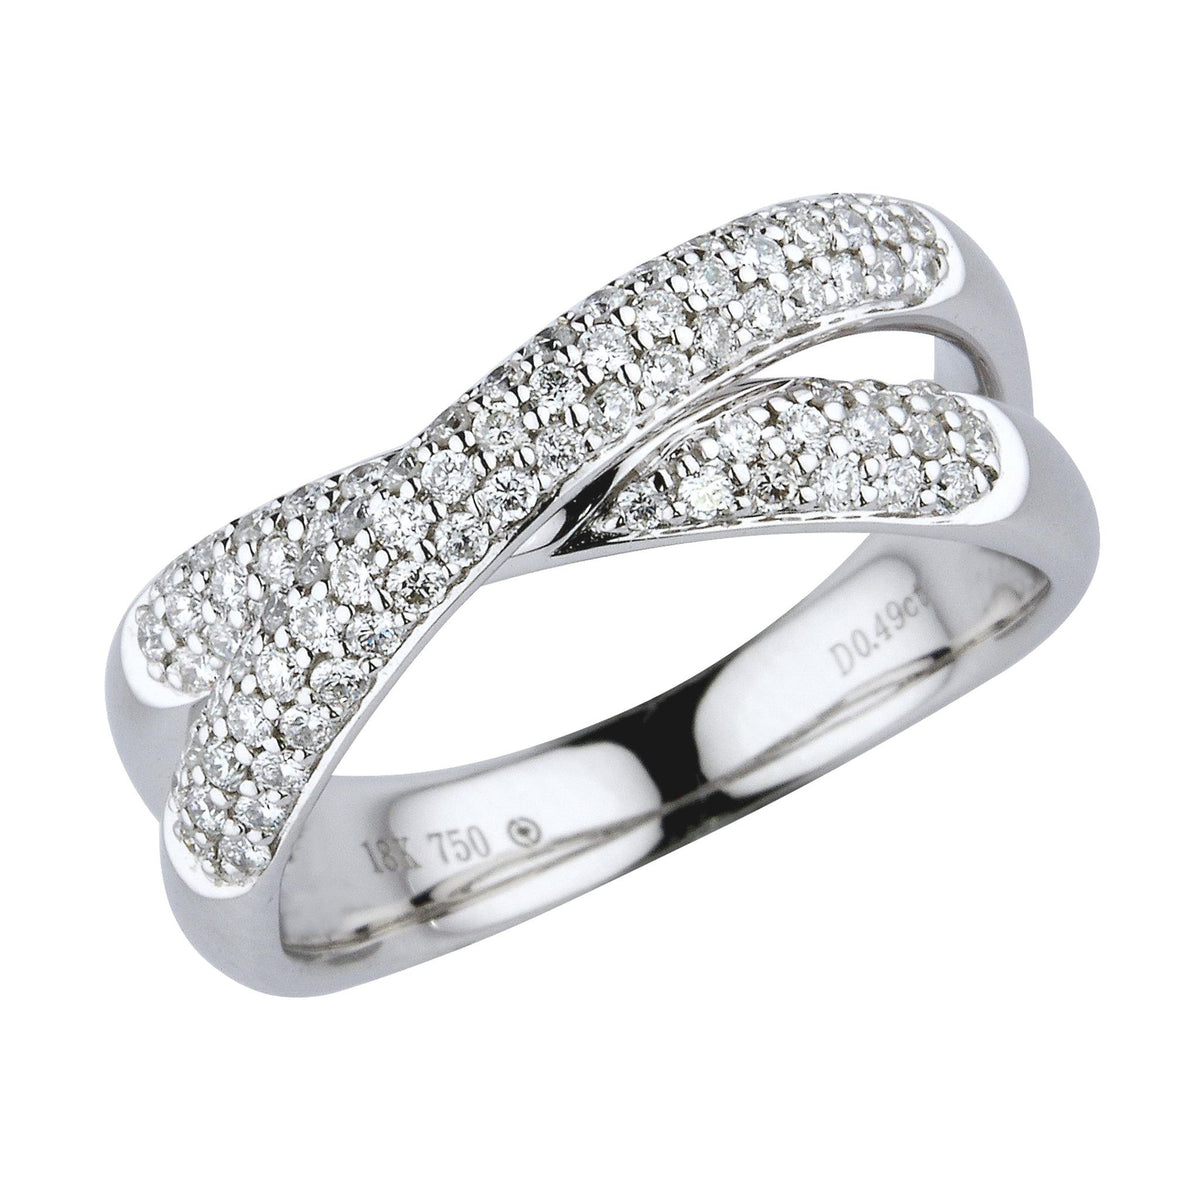 18Kt White Gold Classic Fashion Fashion Ring With 0.51cttw Natural Diamonds